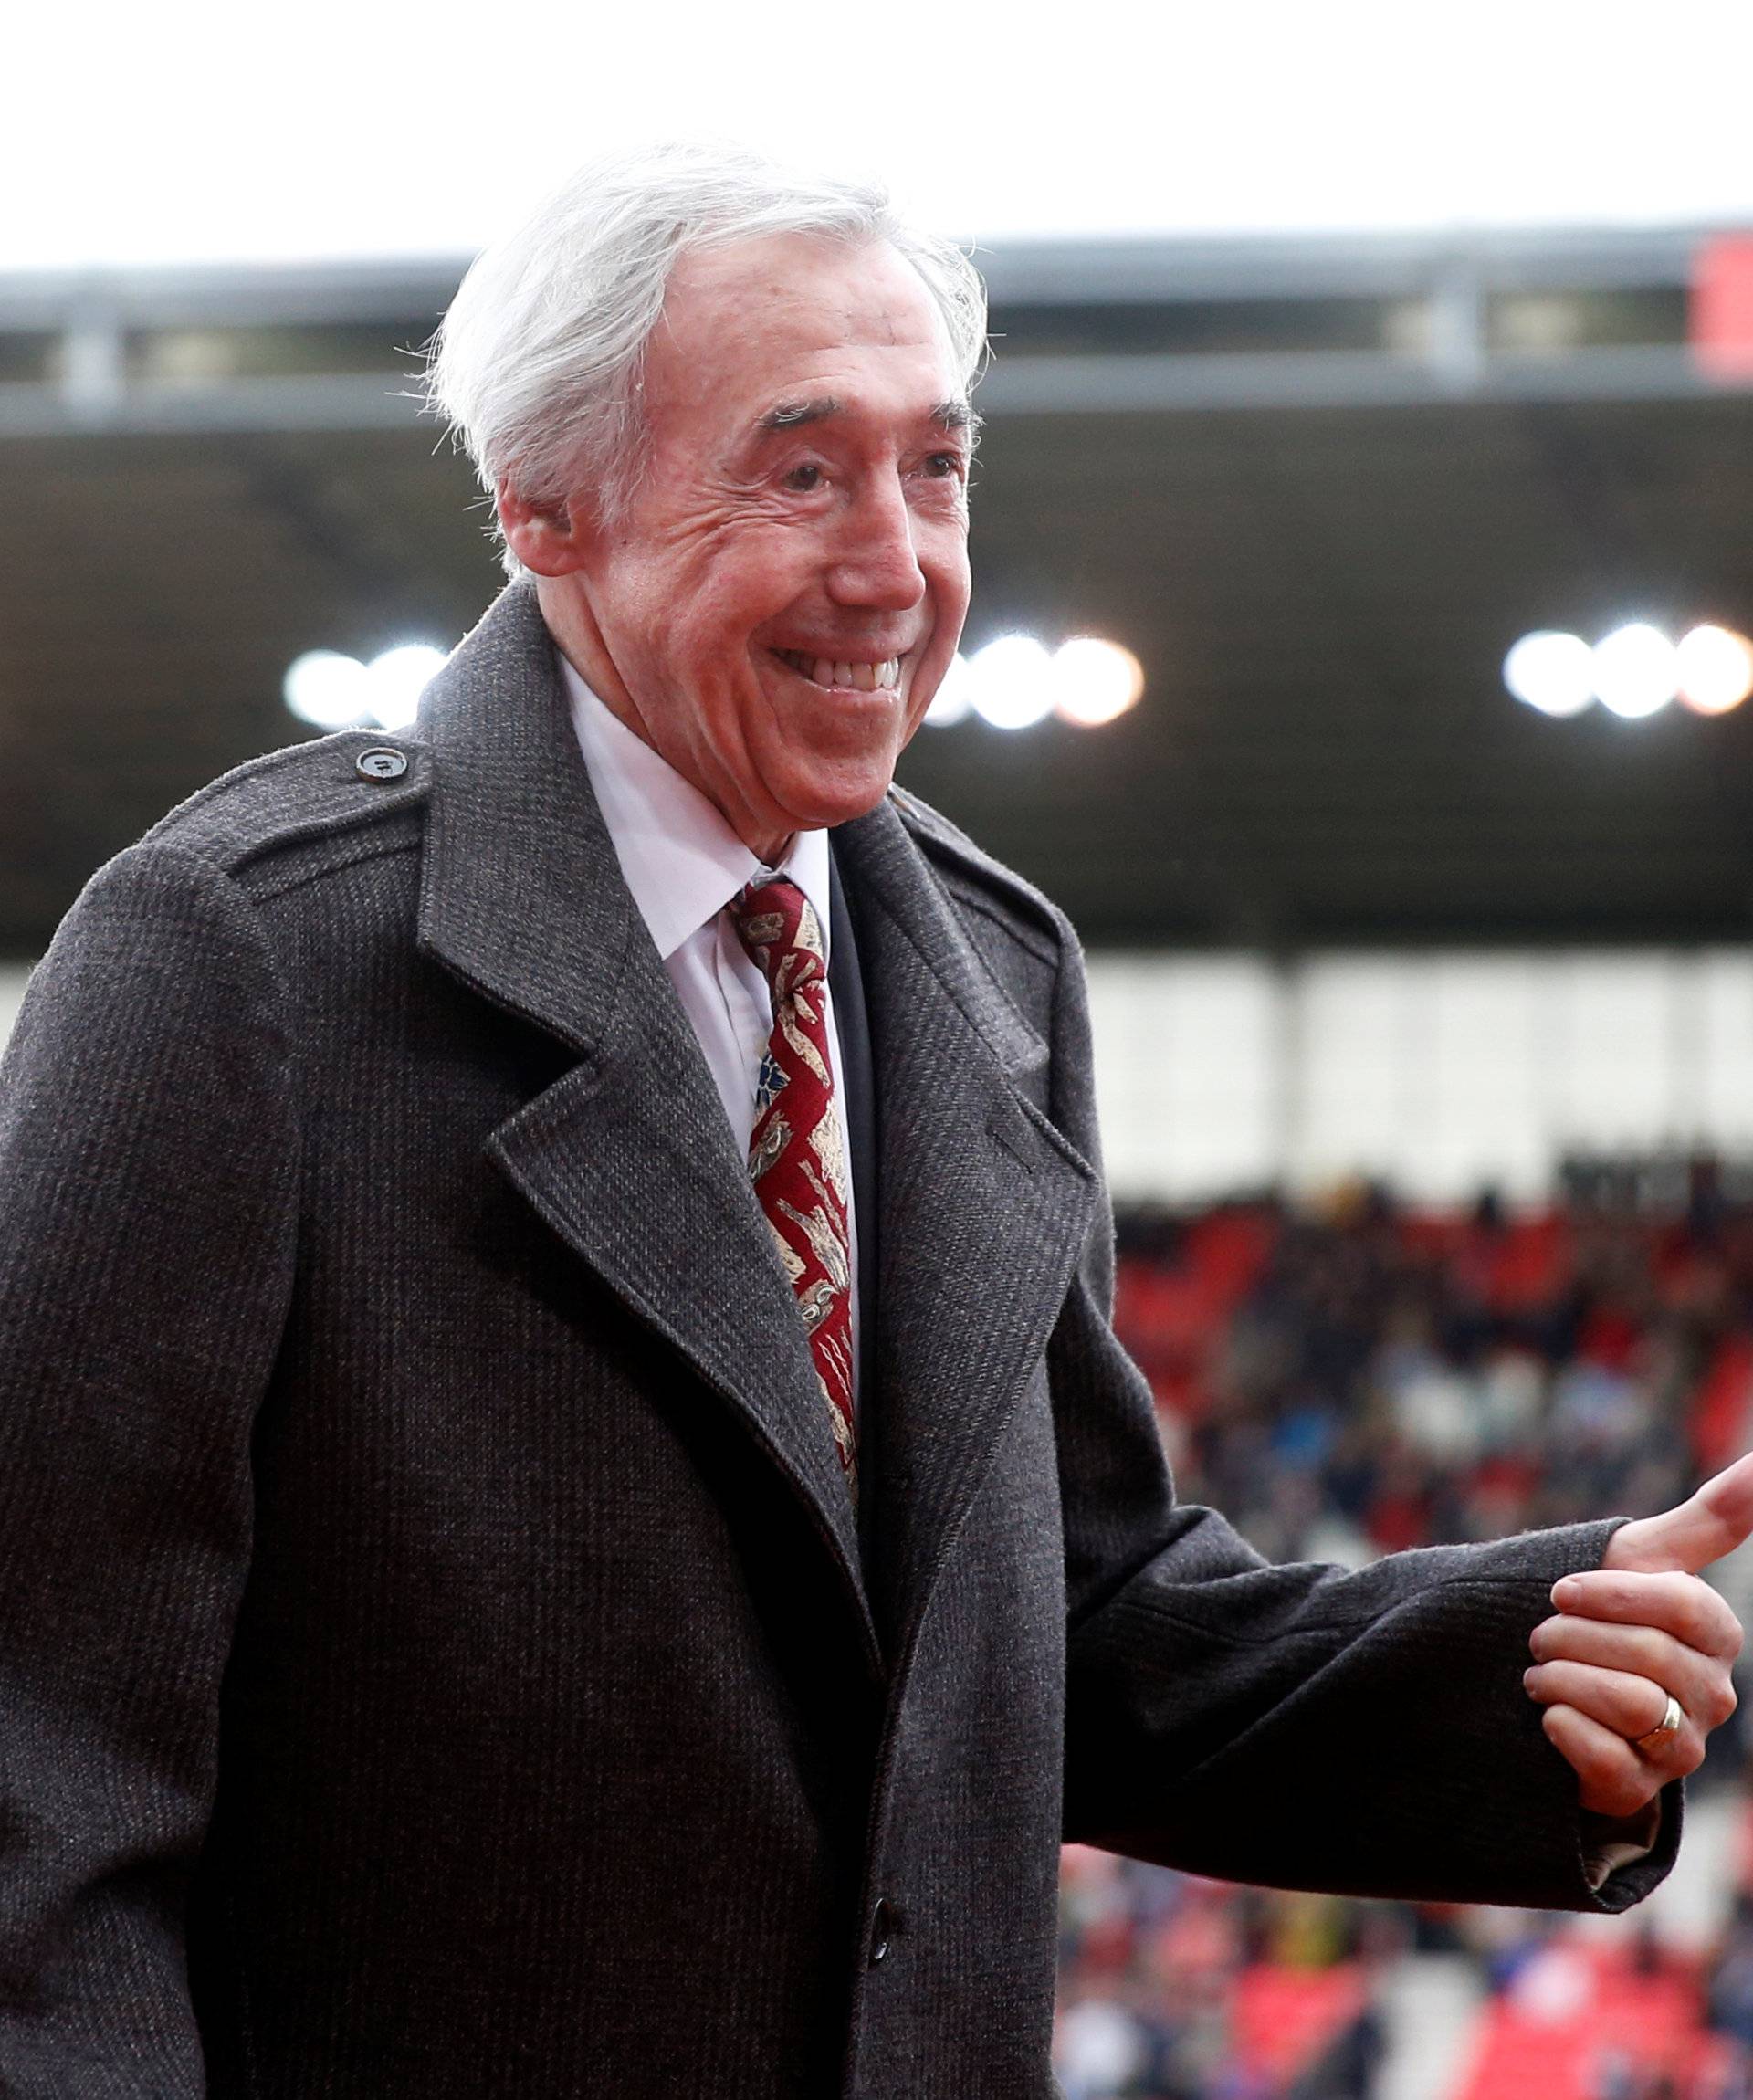 FILE PHOTO: Former Stoke City and England footballer Gordon Banks before the match